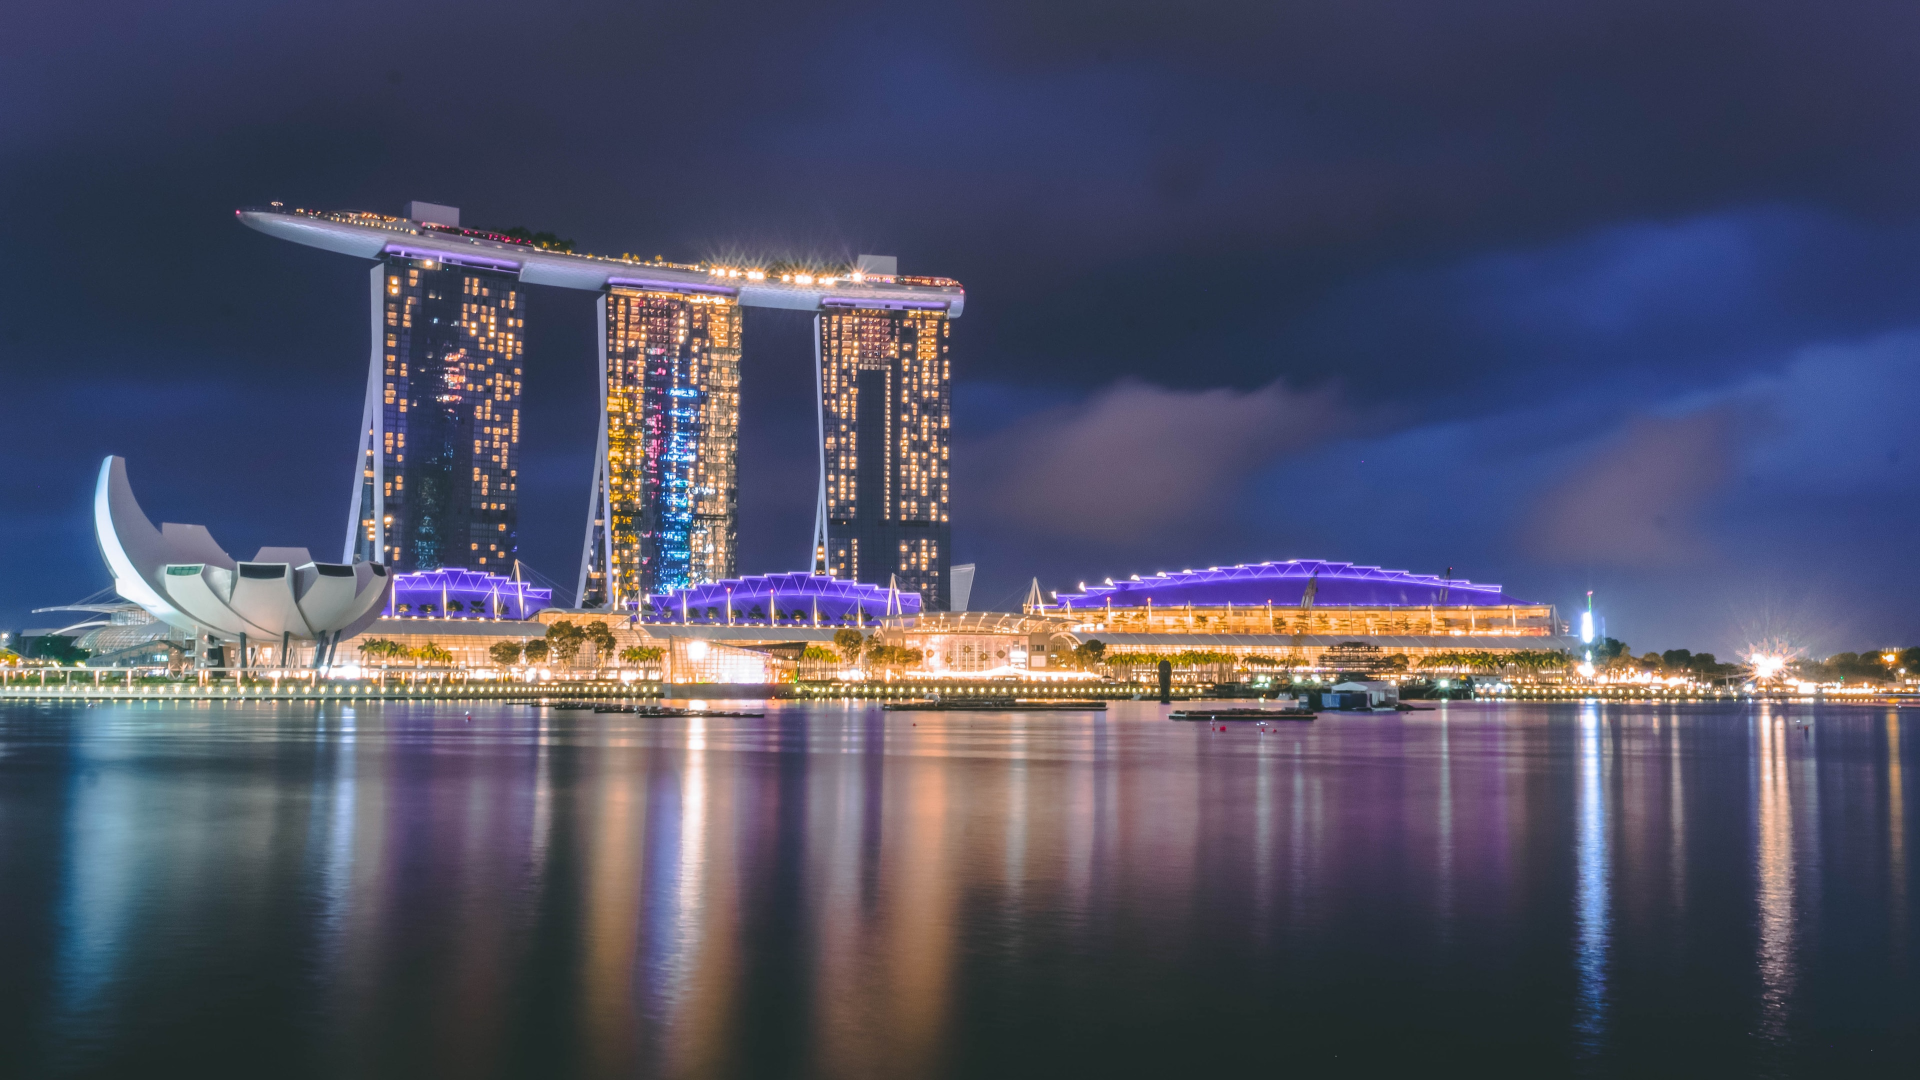 Marina Bay Sands Singapore launches WeChat iBeacon Campaign in collaboration with FOMO Pay